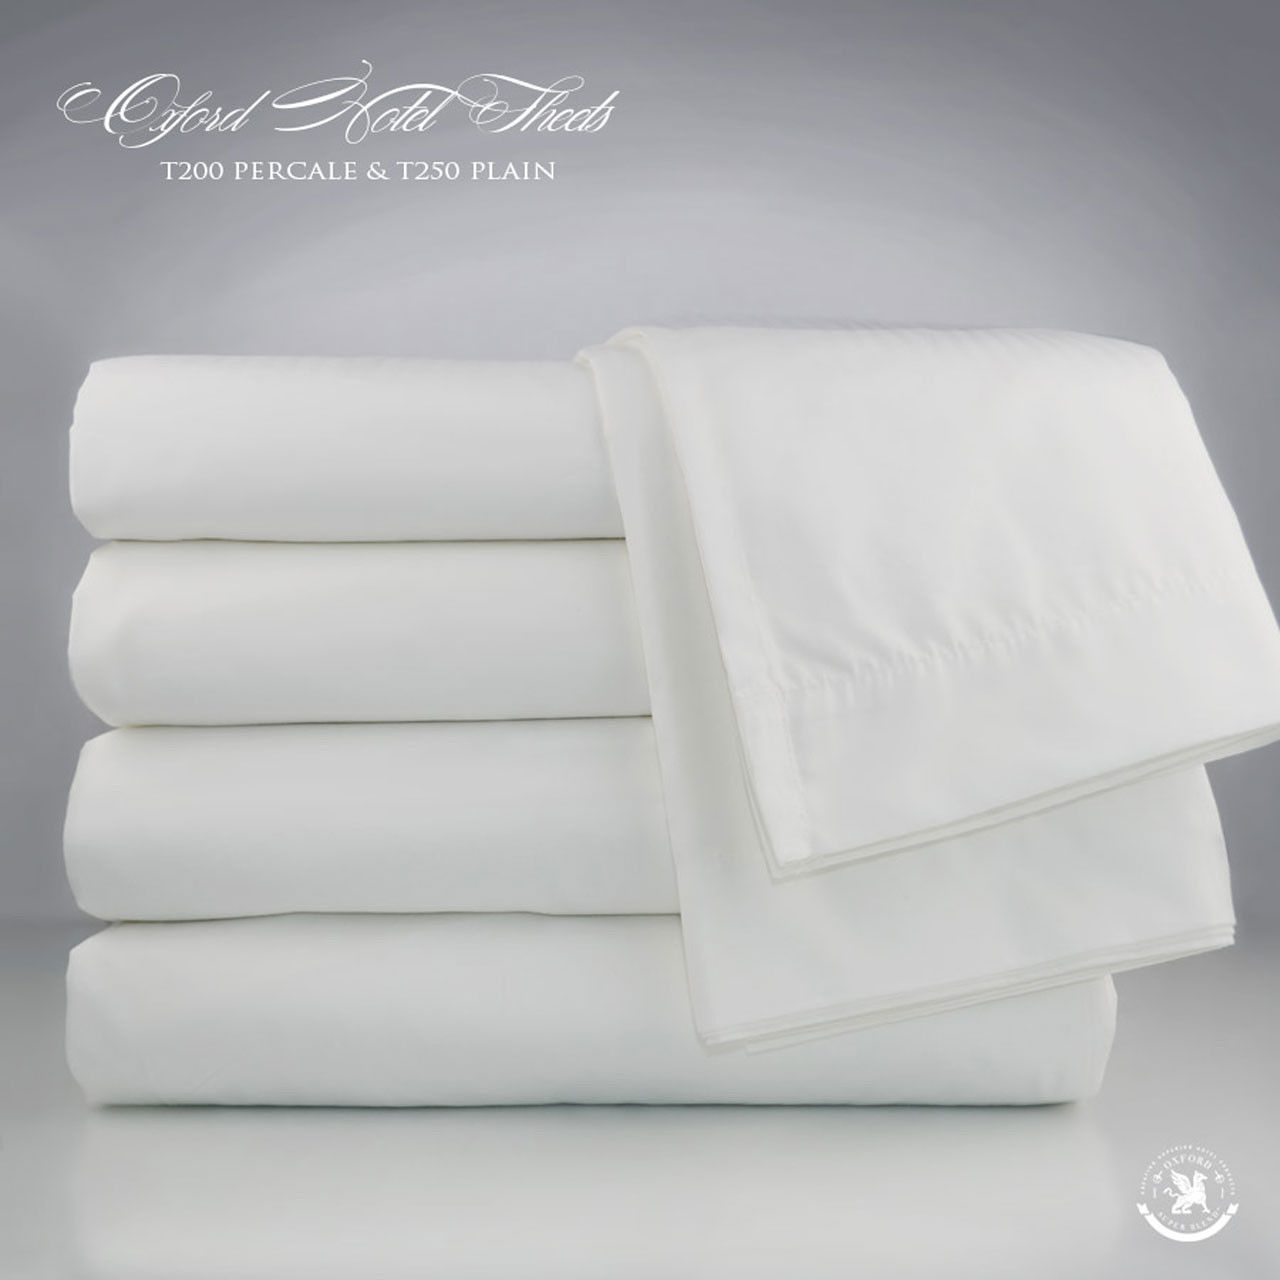 Which items come with the Oxford Super Blend sheets in the T-200 Bed Linens collection?